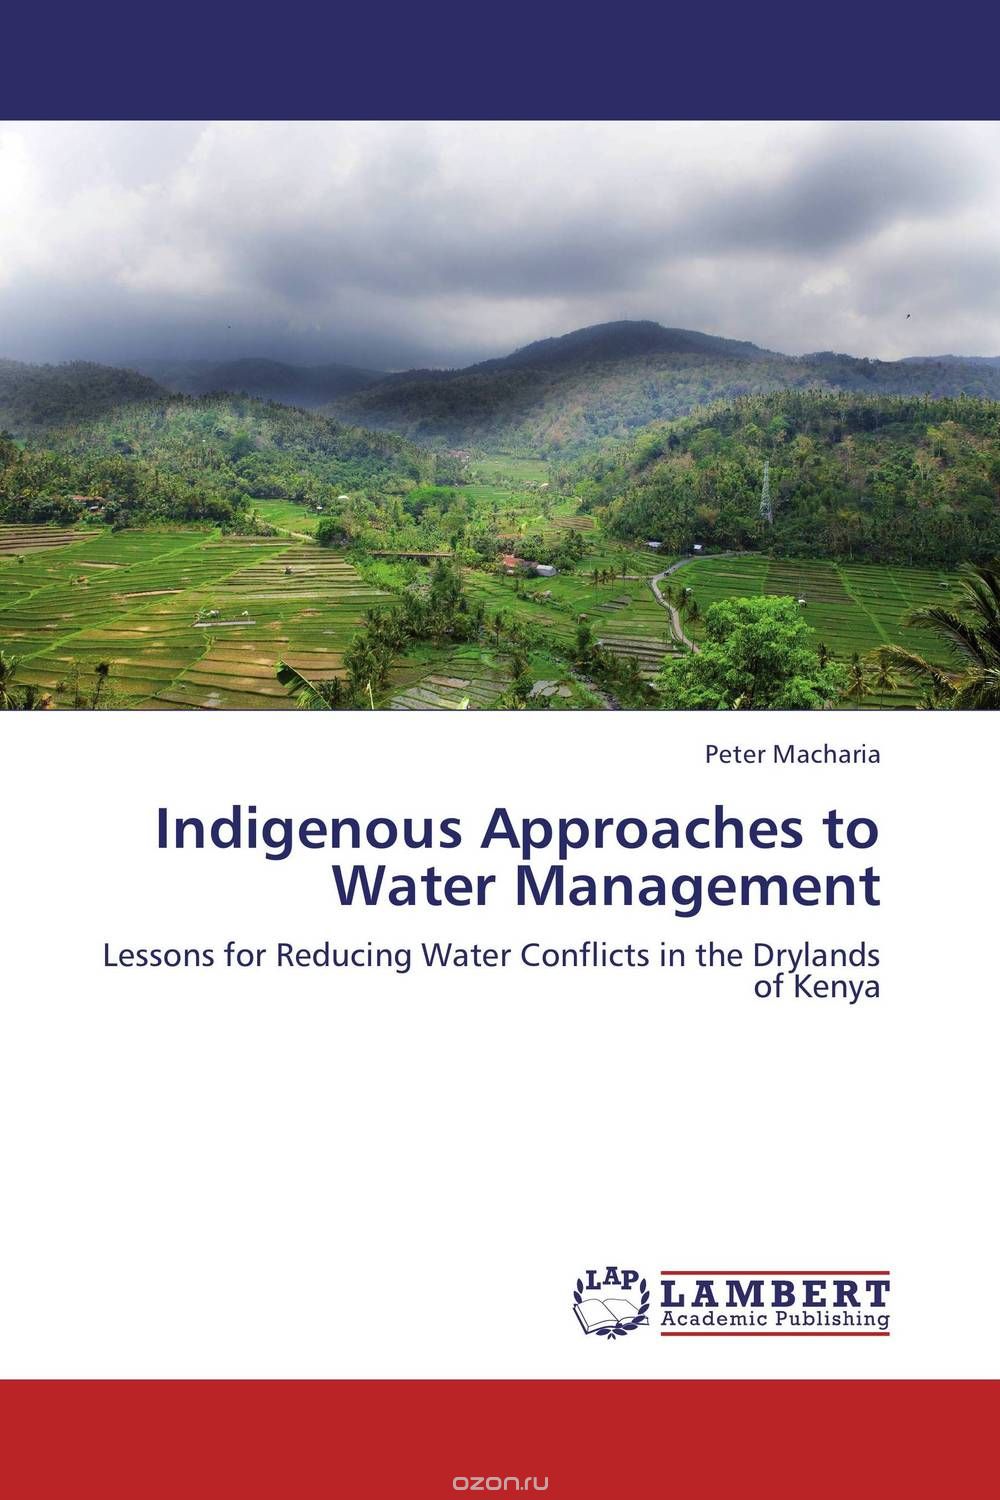 Indigenous Approaches to Water Management